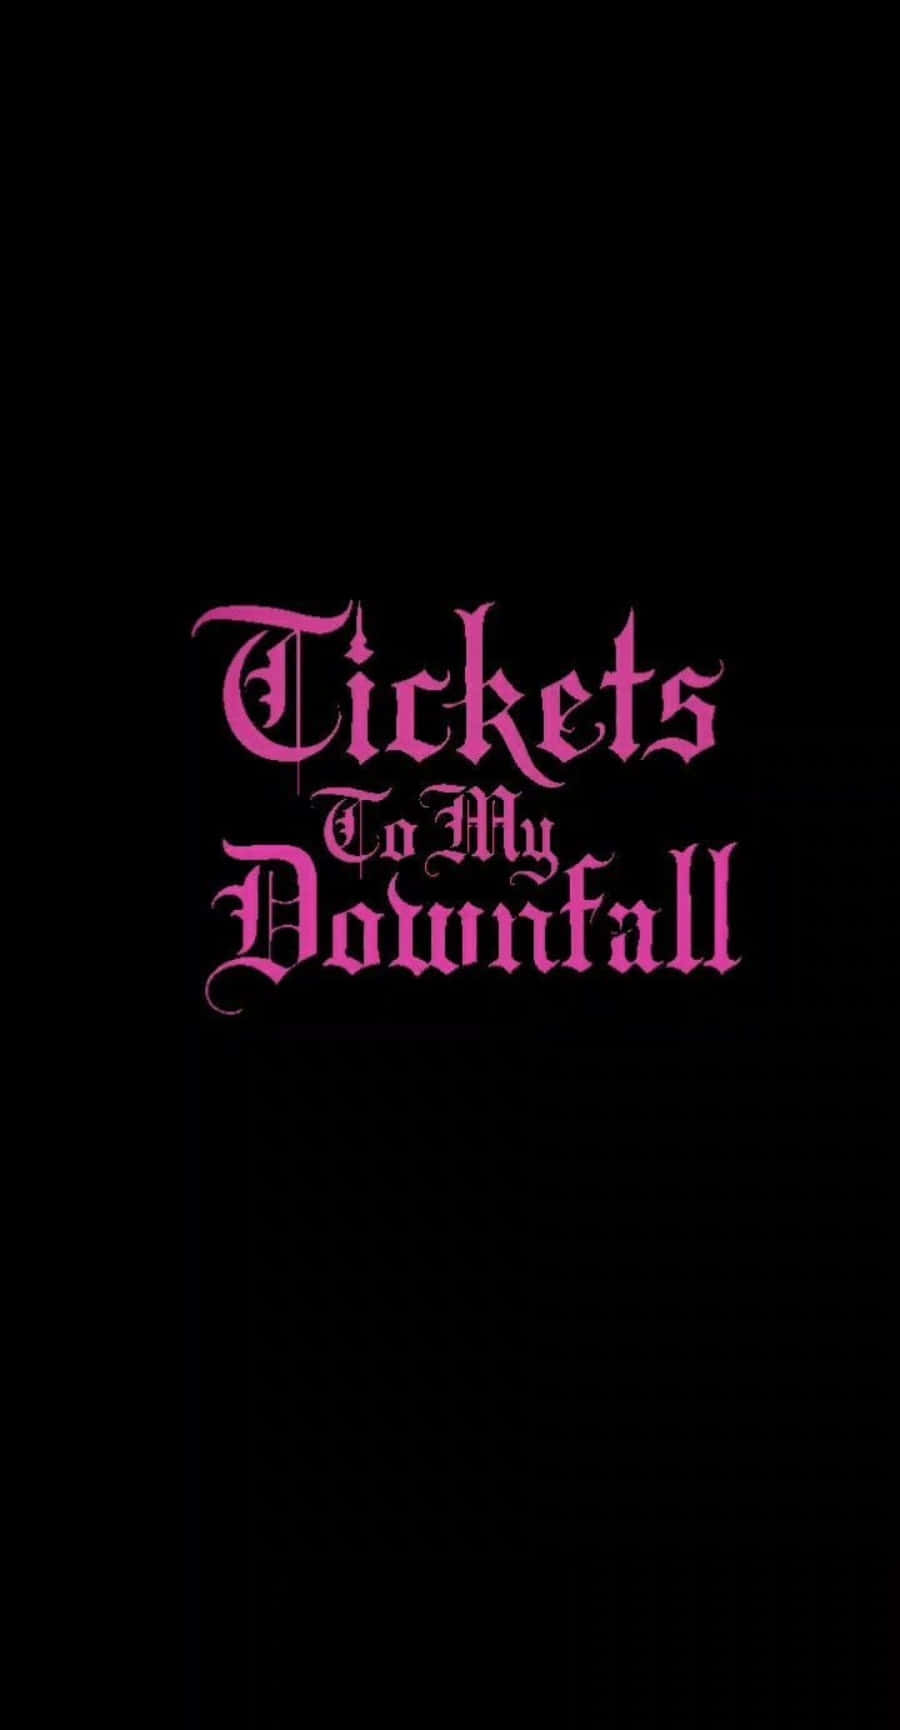 Tickets To My Downfall On Black Wallpaper